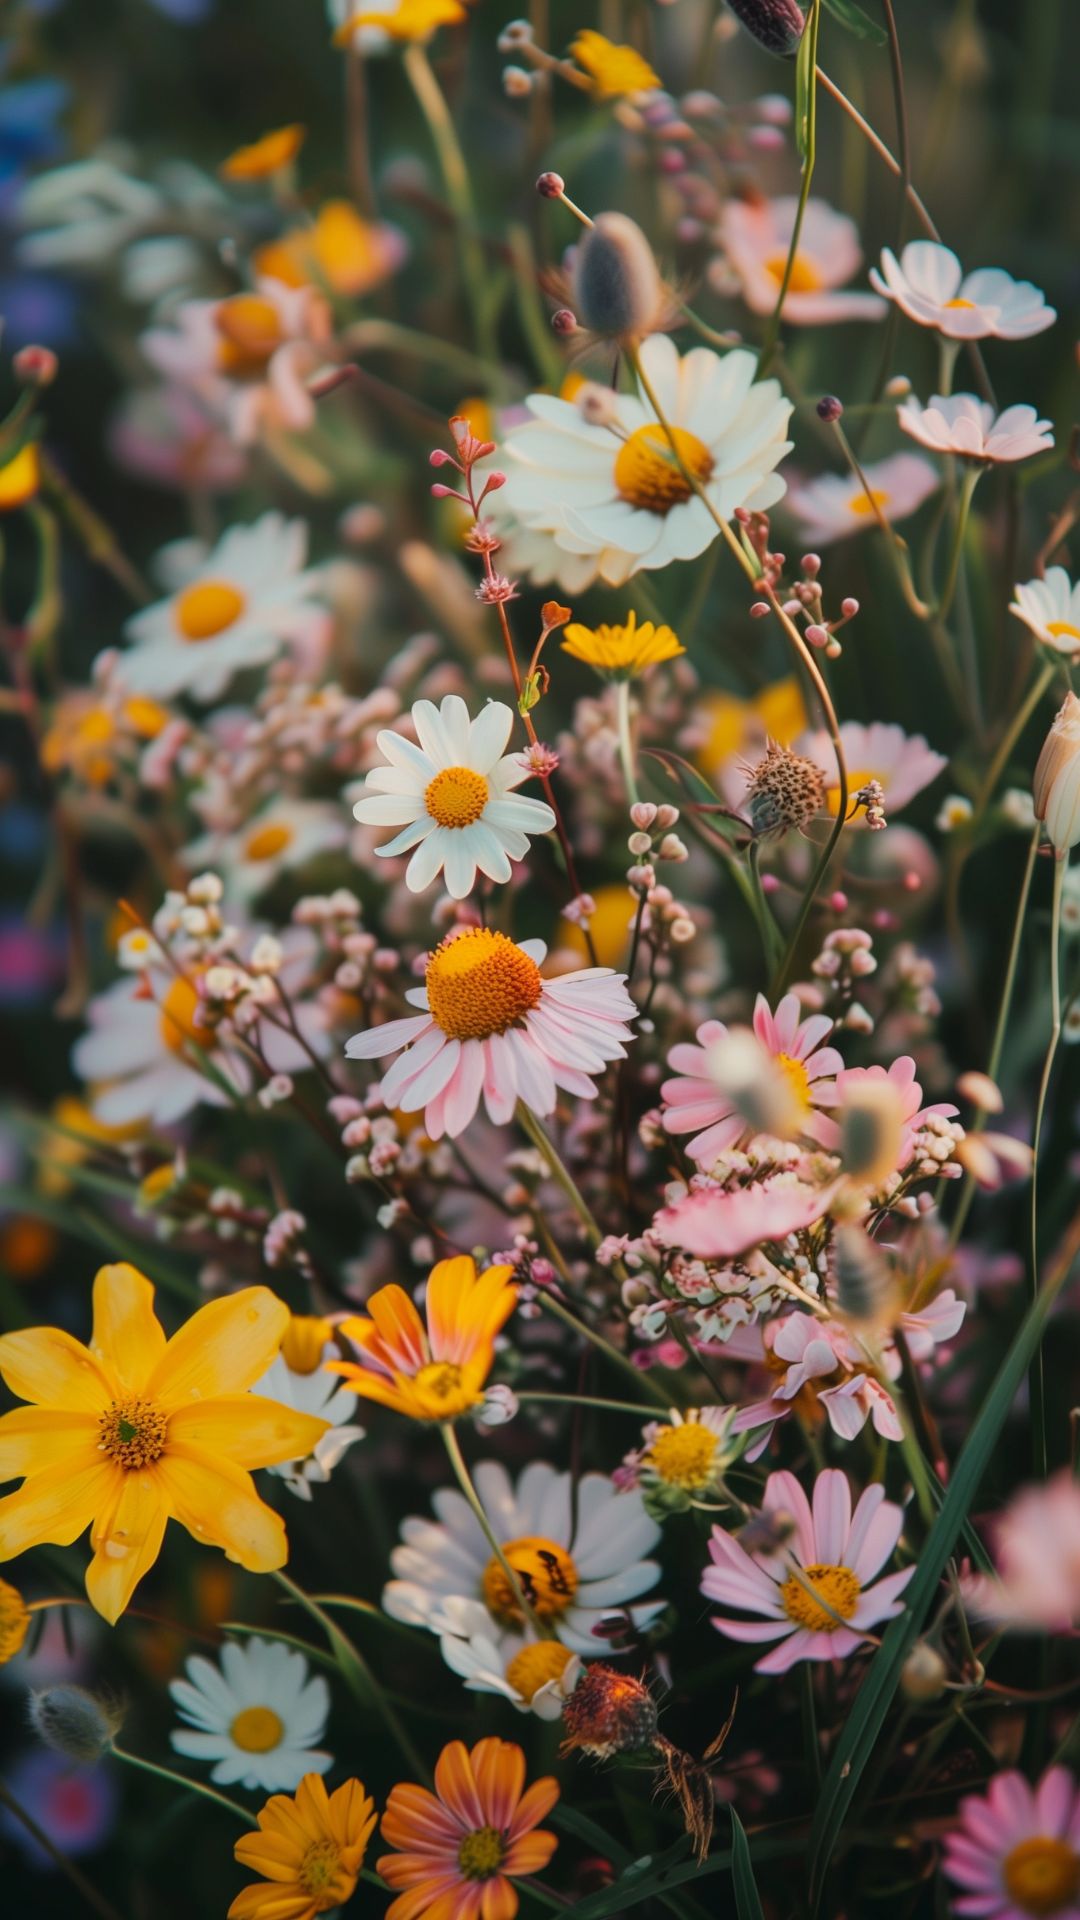 21 Floral iPhone Wallpapers and Midjourney Prompts by Sprinkle of AI